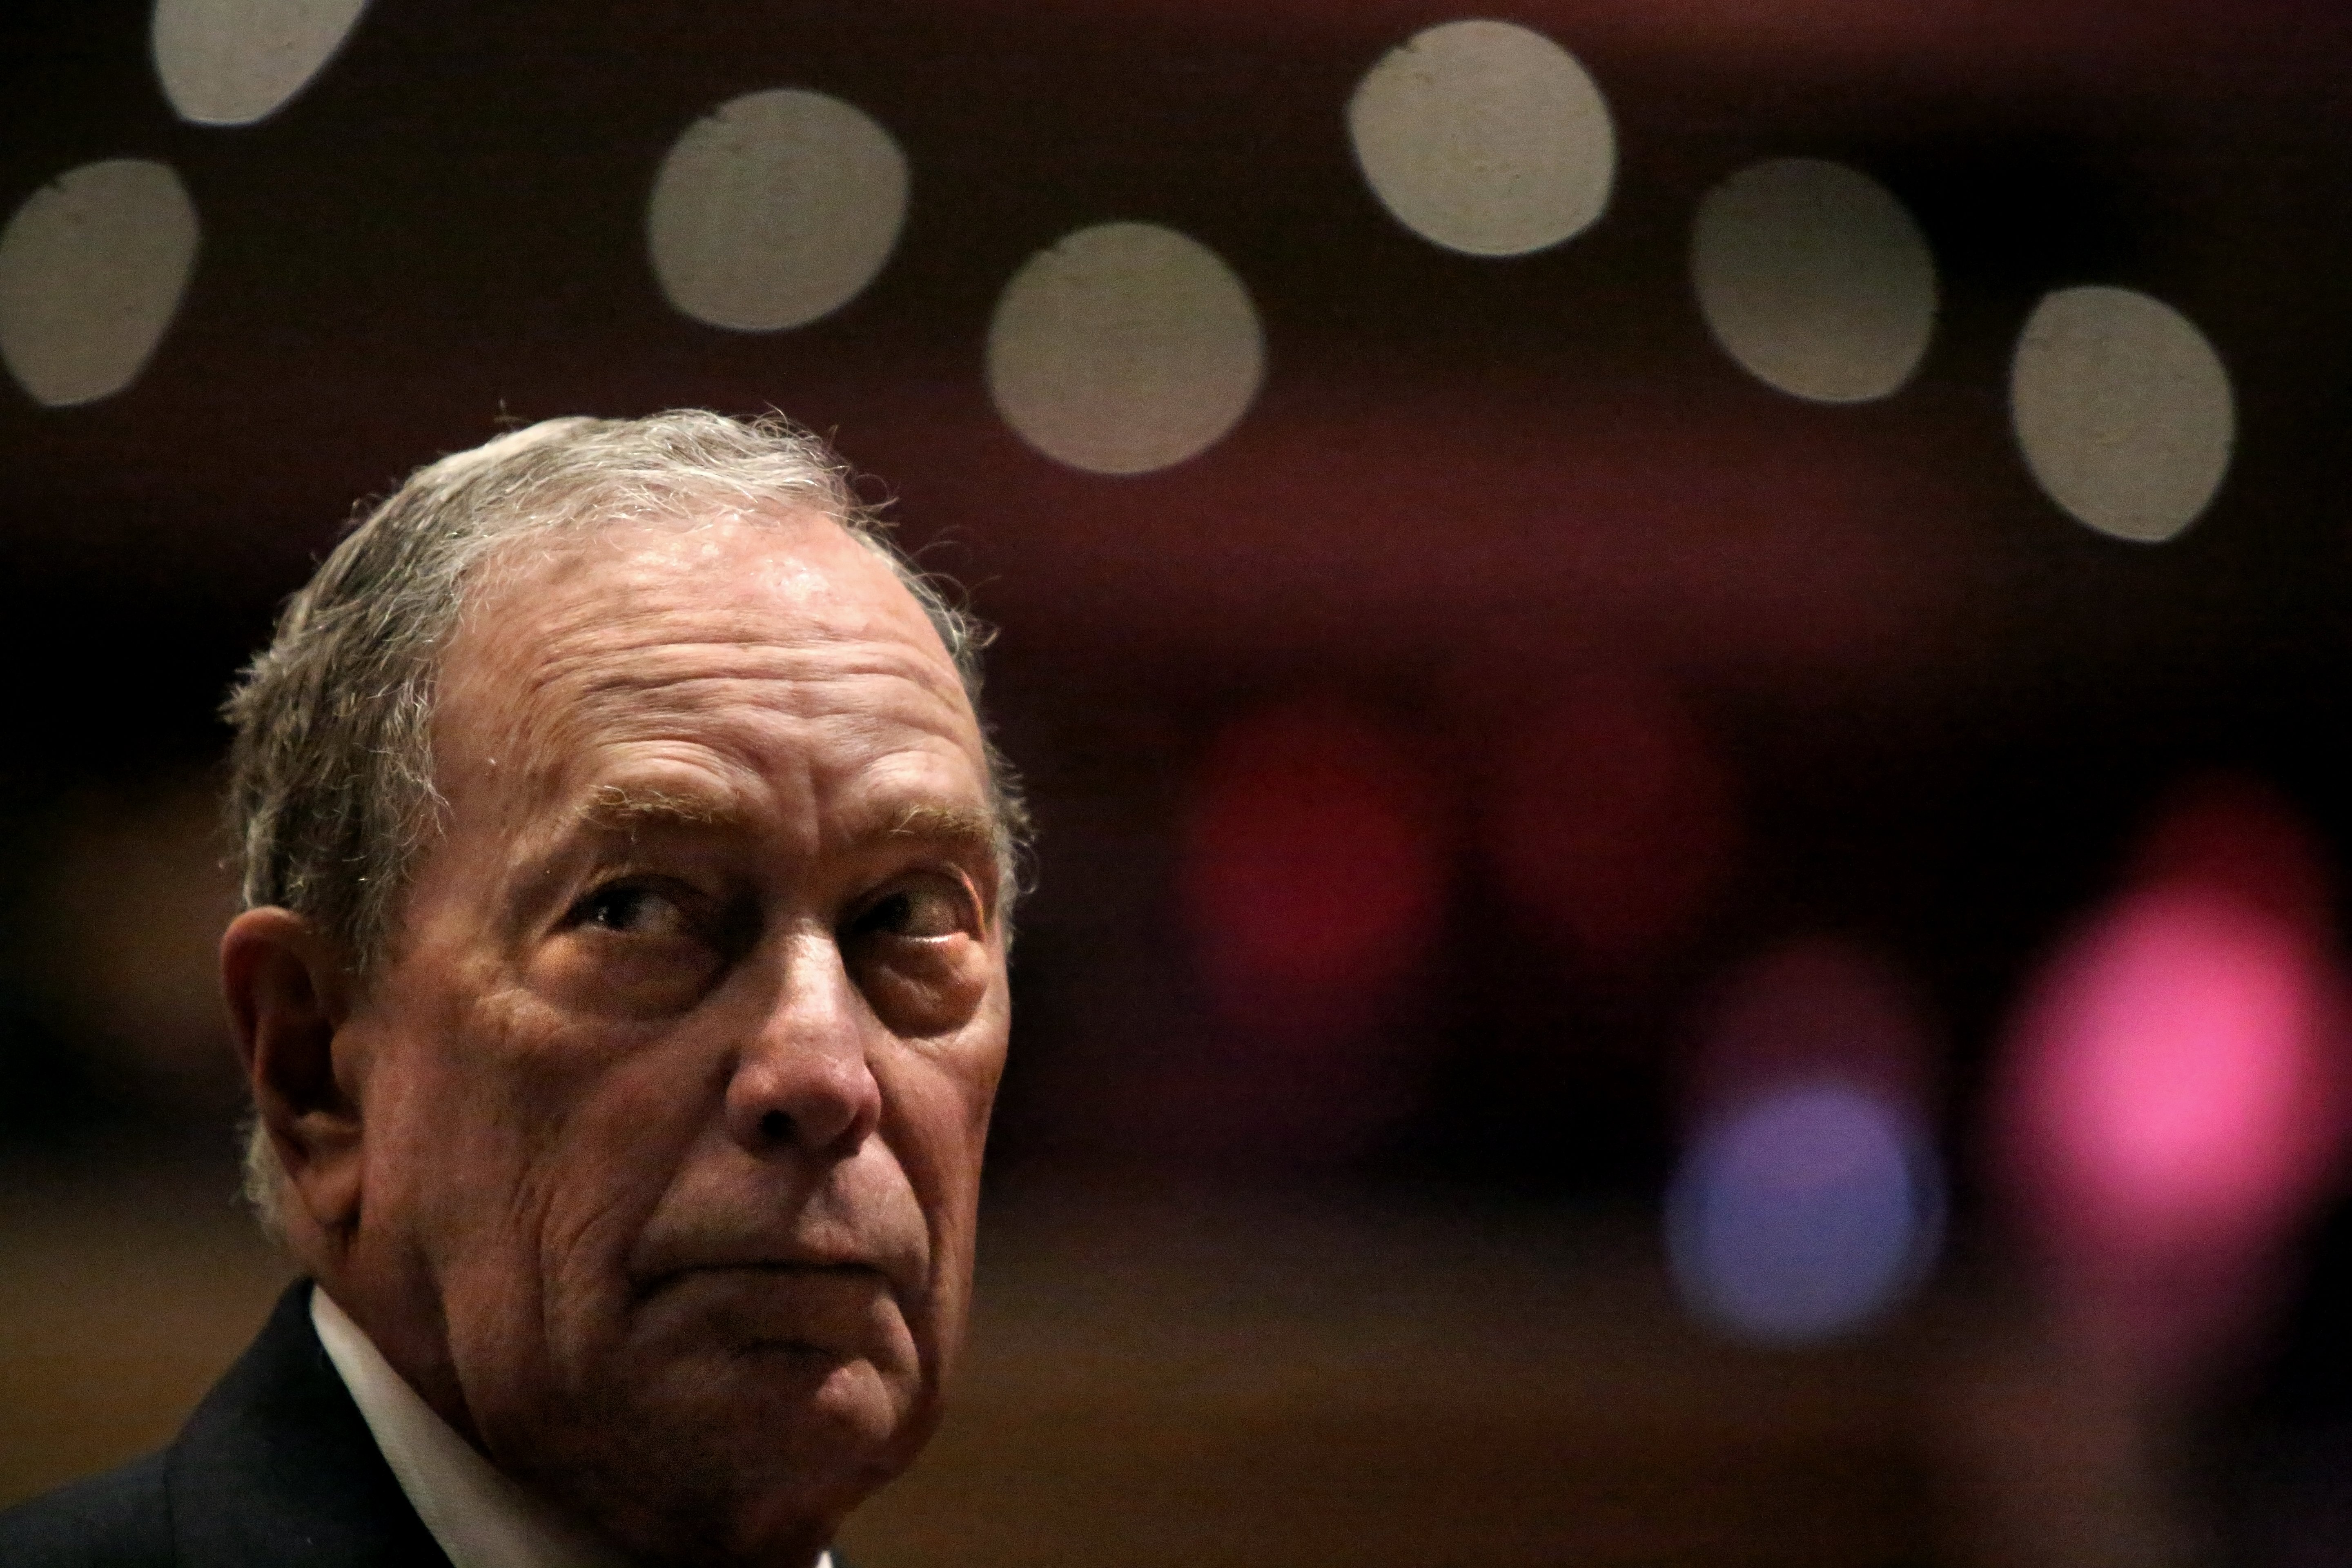 NEW YORK, NY - NOVEMBER 17: Michael Bloomberg prepares to speak at the Christian Cultural Center on November 17, 2019 in the Brooklyn borough of New York City. Reports indicate Bloomberg, the former New York mayor, is considering entering the crowded Democratic presidential primary race. (Photo by Yana Paskova/Getty Images)